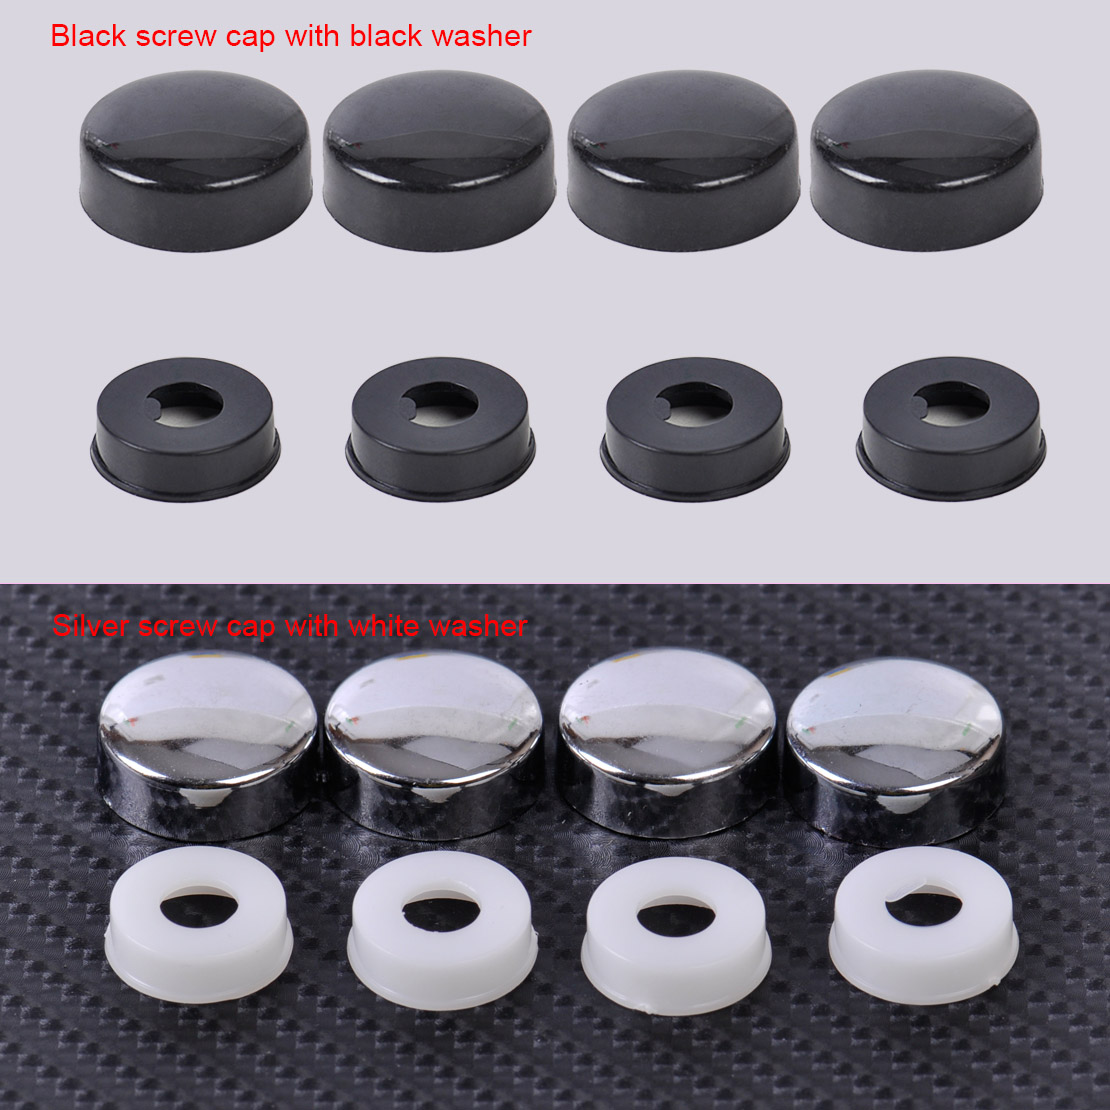 Black 4 PCS Security Screw Caps Bolt Covers for Car Truck License Plate Frame